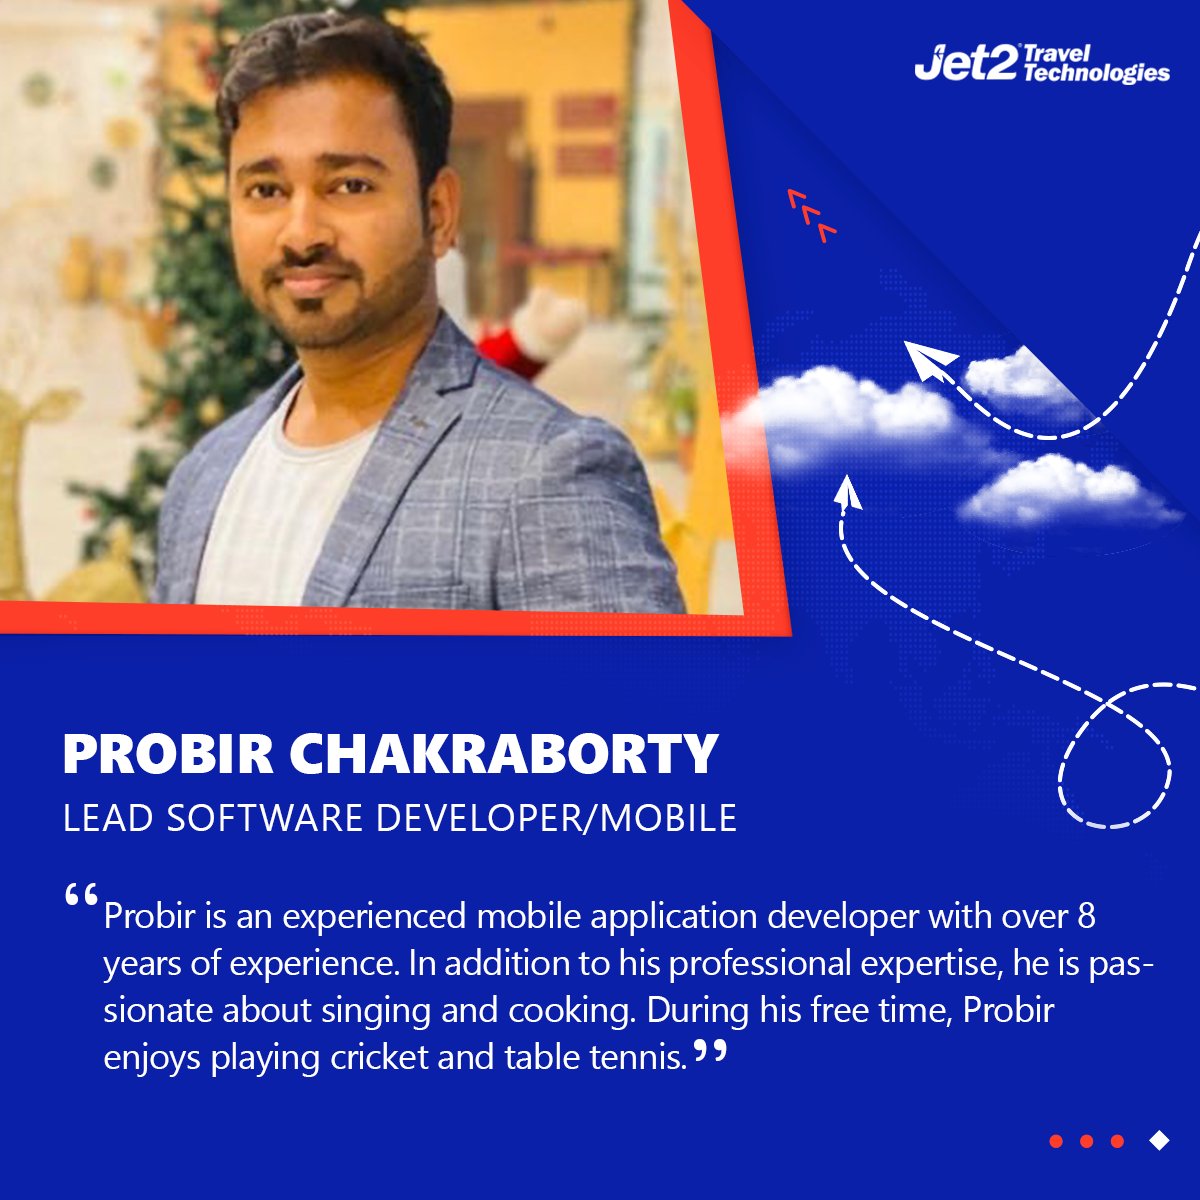 Join us in welcoming Probir Chakraborty, as we embark on an exciting journey of growth and success together!

#Jet2TT #Jet2TravelTechnologies #LifeAtJet2TT #Employees #Hiring #Techhiring #Talentacquisition #Careers #Appdevelopers #JobAlert #TechJobs #TechCareers #ITHiring #ITJobs